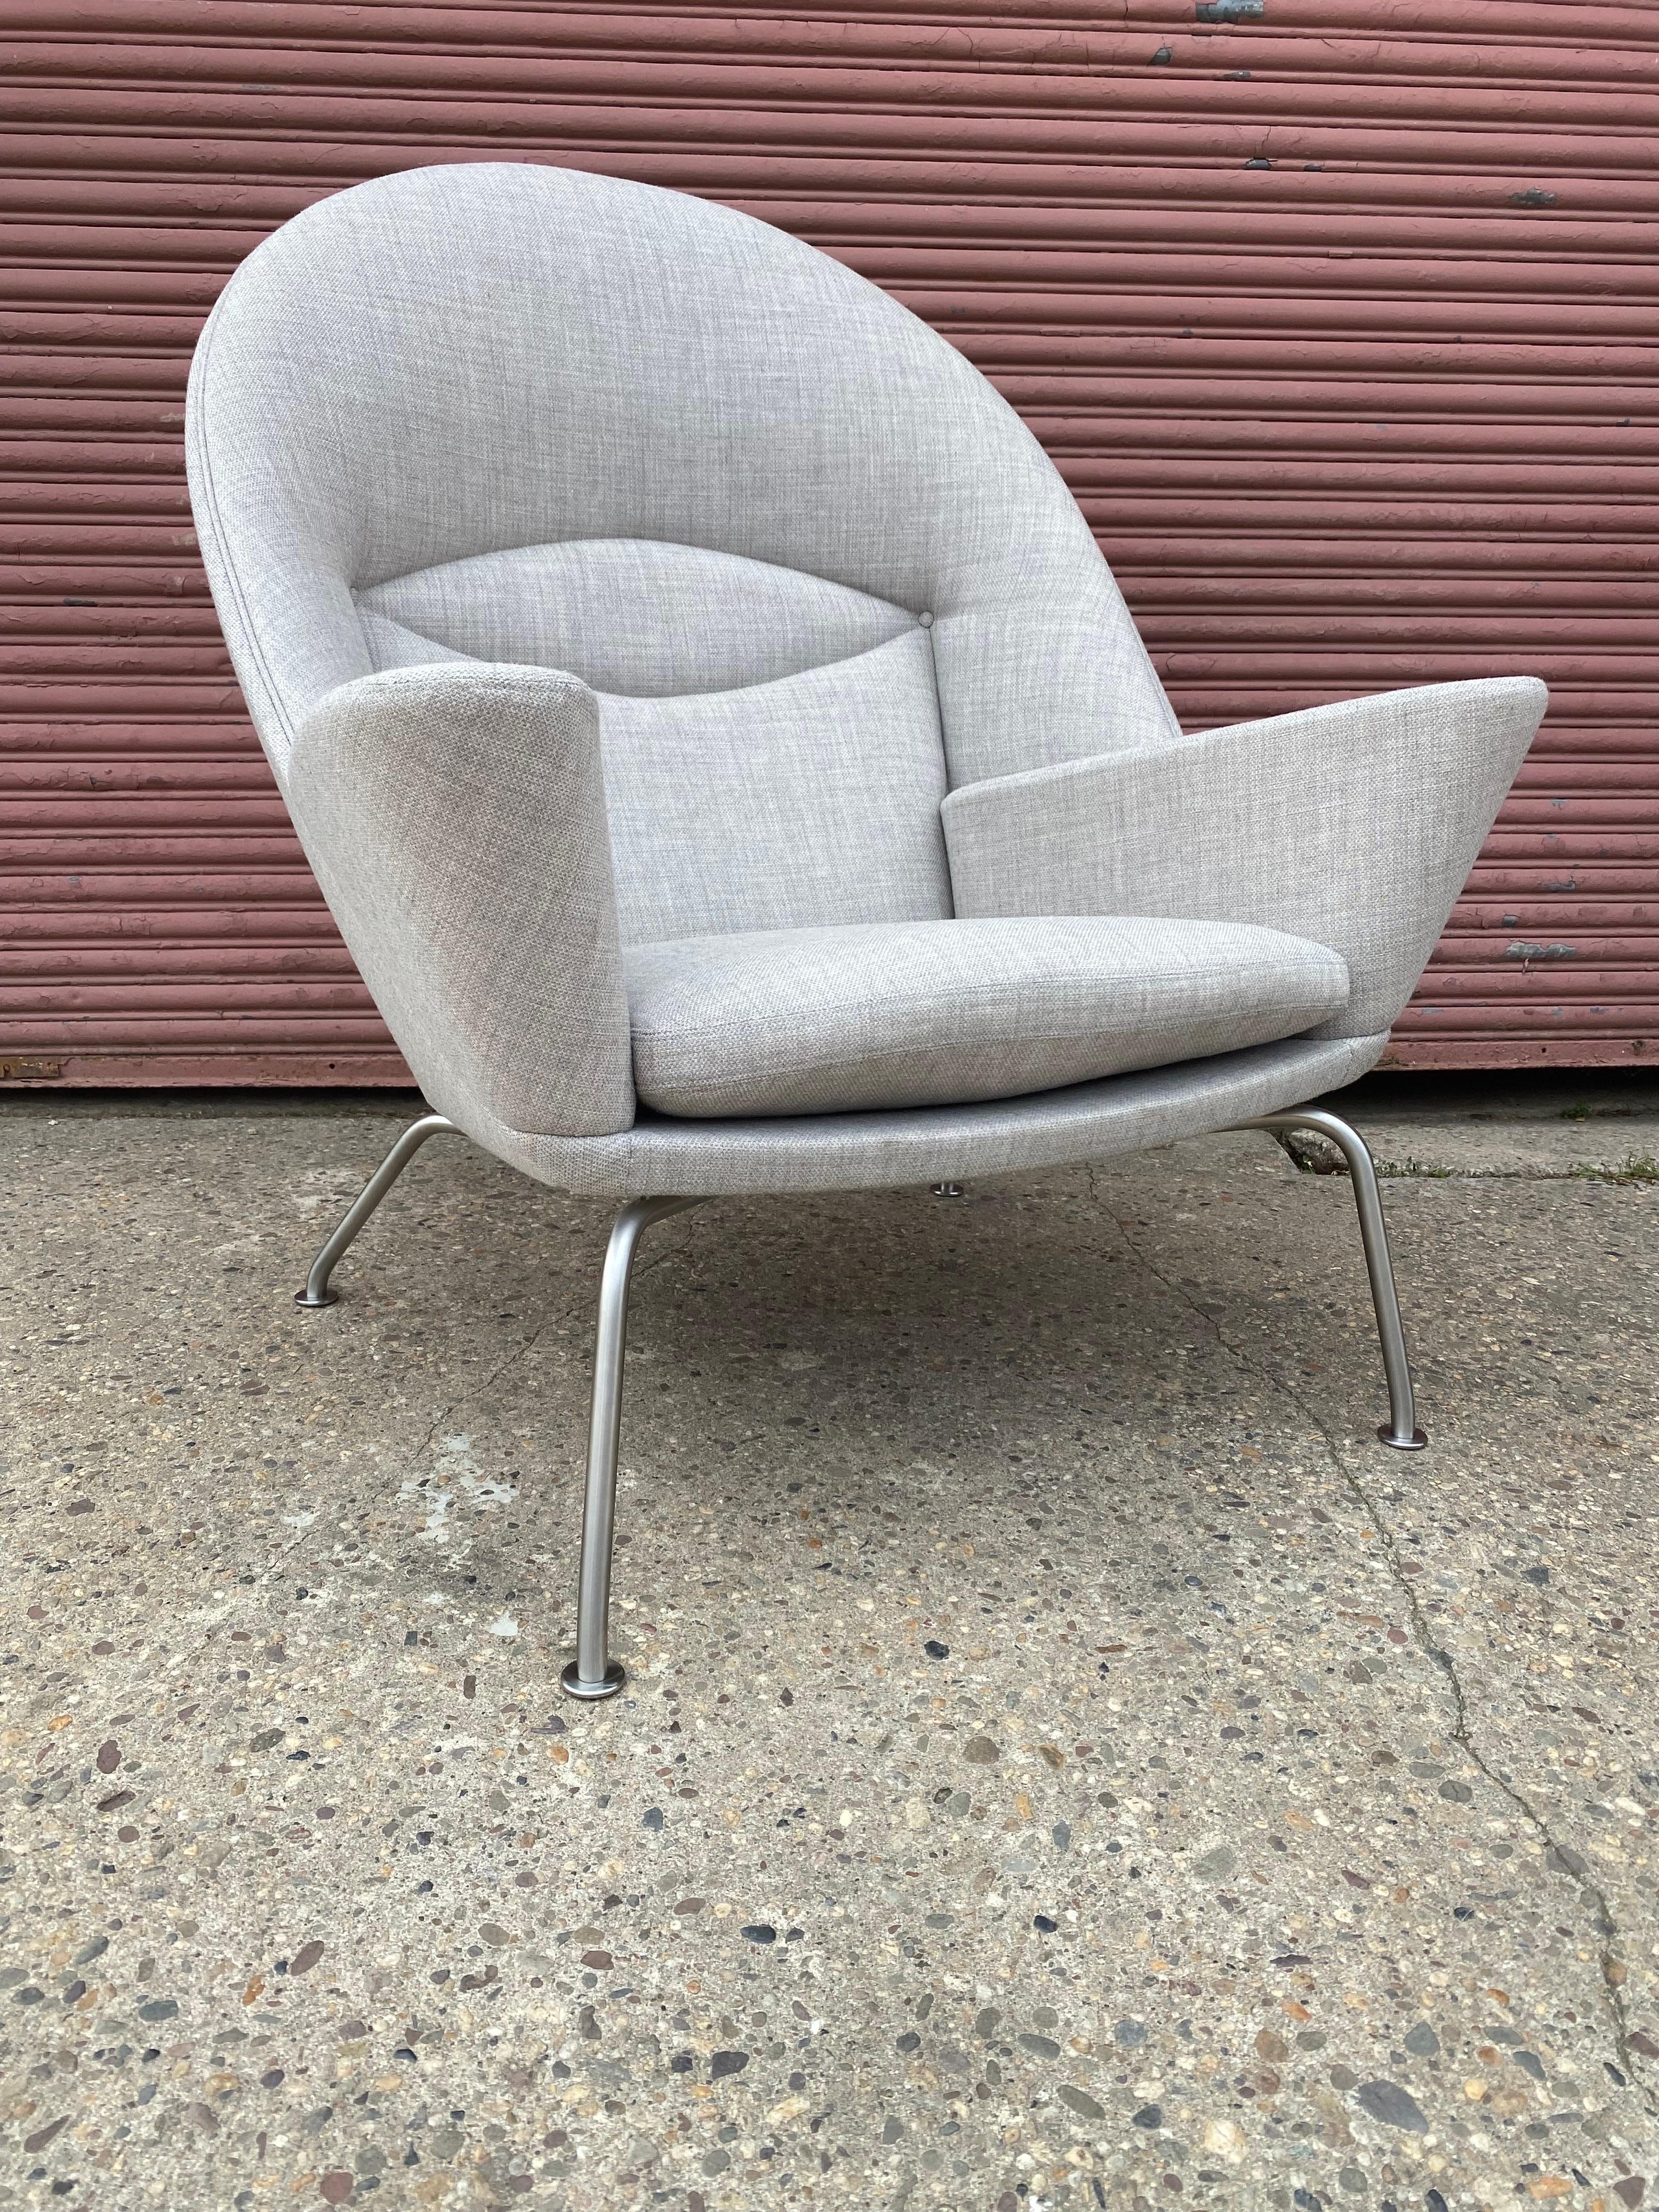 Hans Wegner for Carl Hansen CH468 Oculus Lounge Chair in like new Condition!  Was used in a show house basically for a photo shoot.  Very clean condition in a gray fabric.  Stainless Steel base very nice as well!  Chairs retails new for 7000-8700!